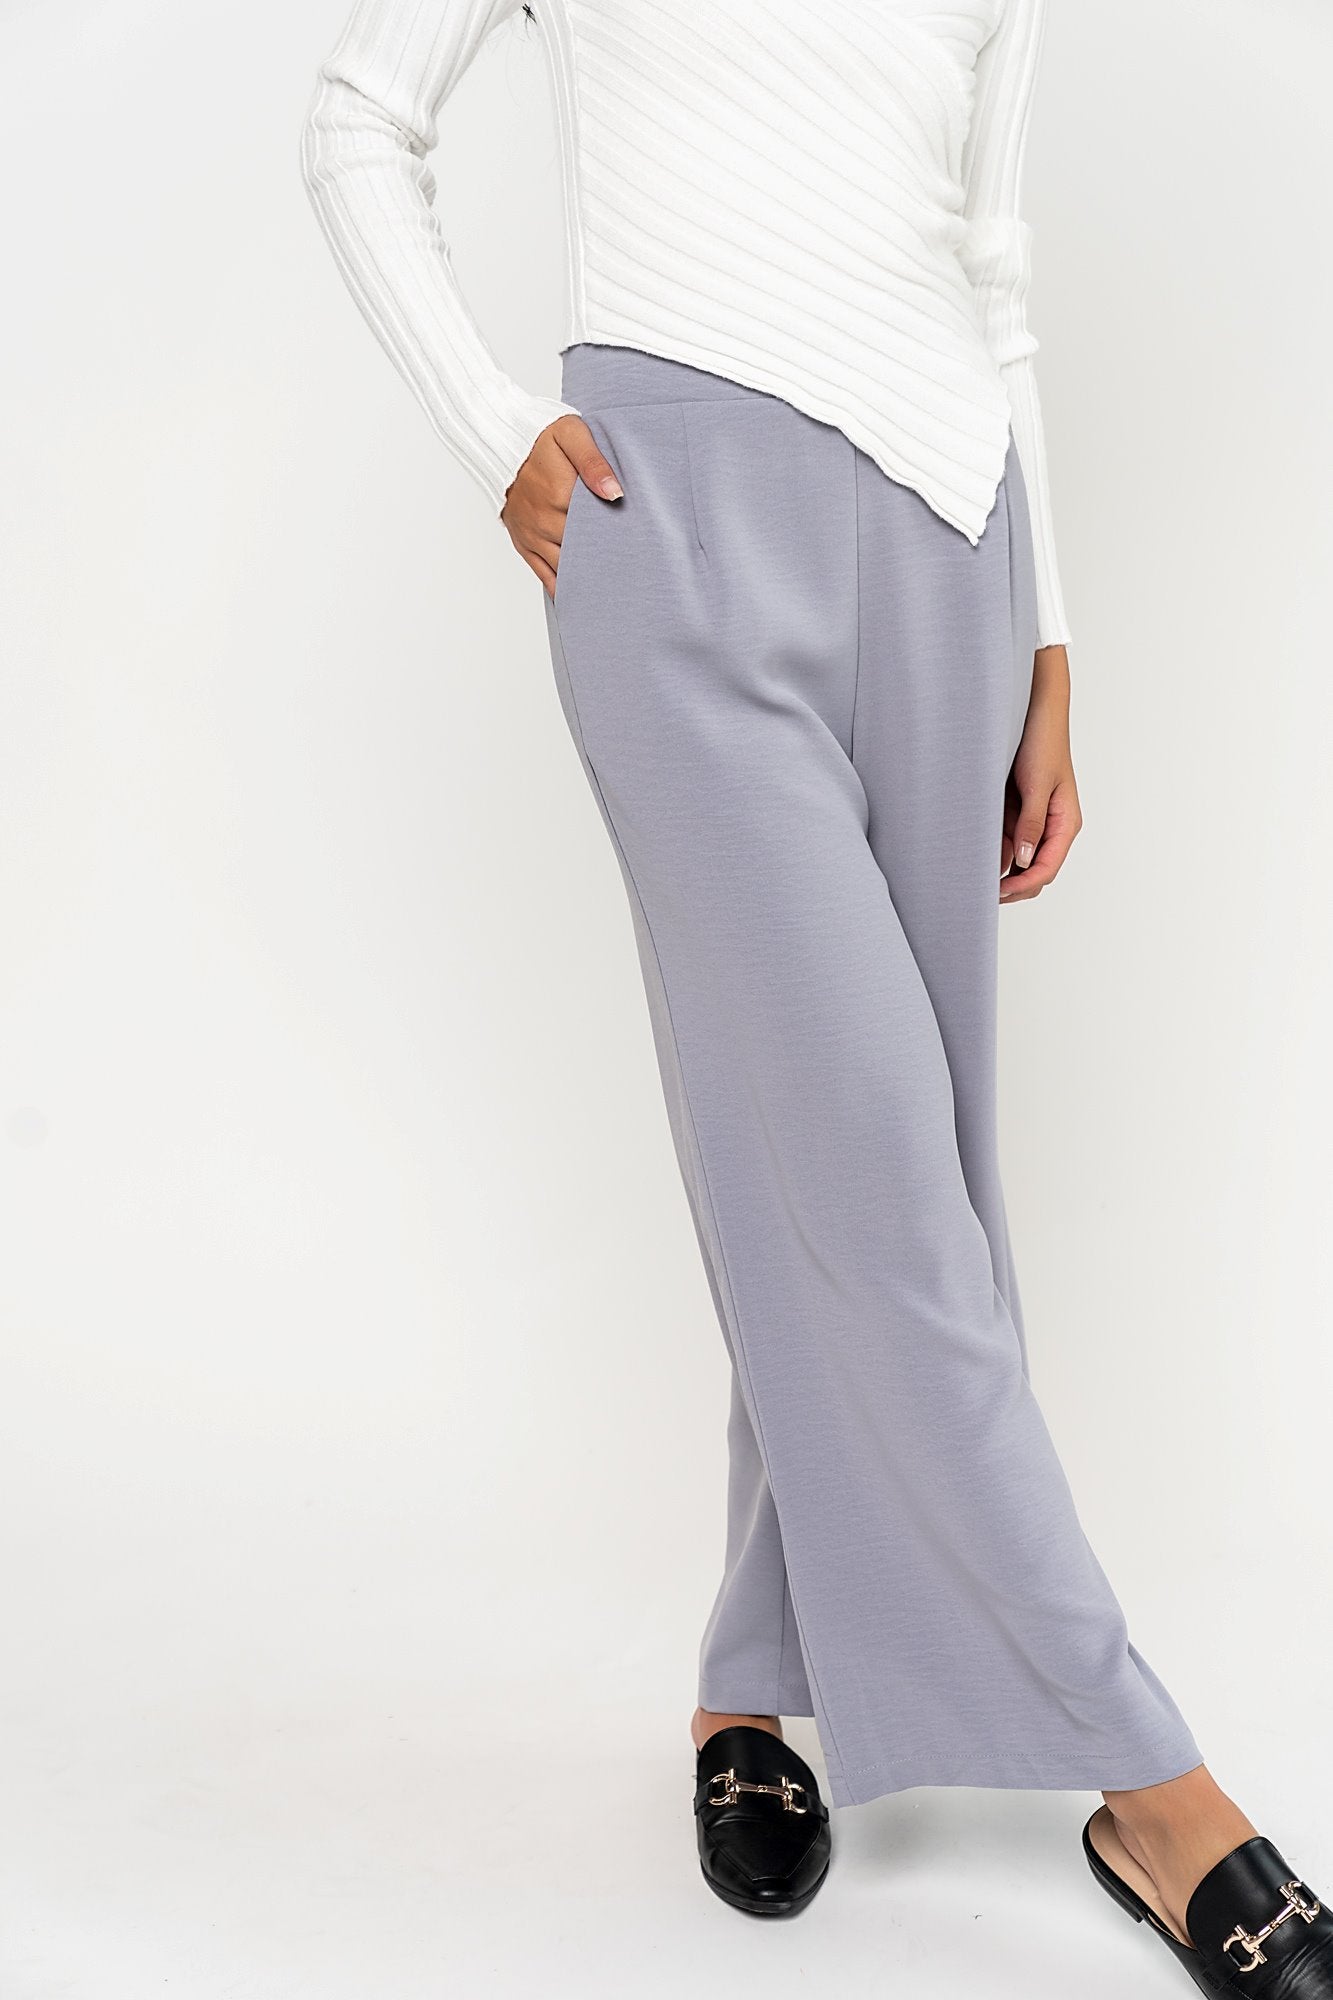 Jovie Pant in Grey (Small-XL) Holley Girl 